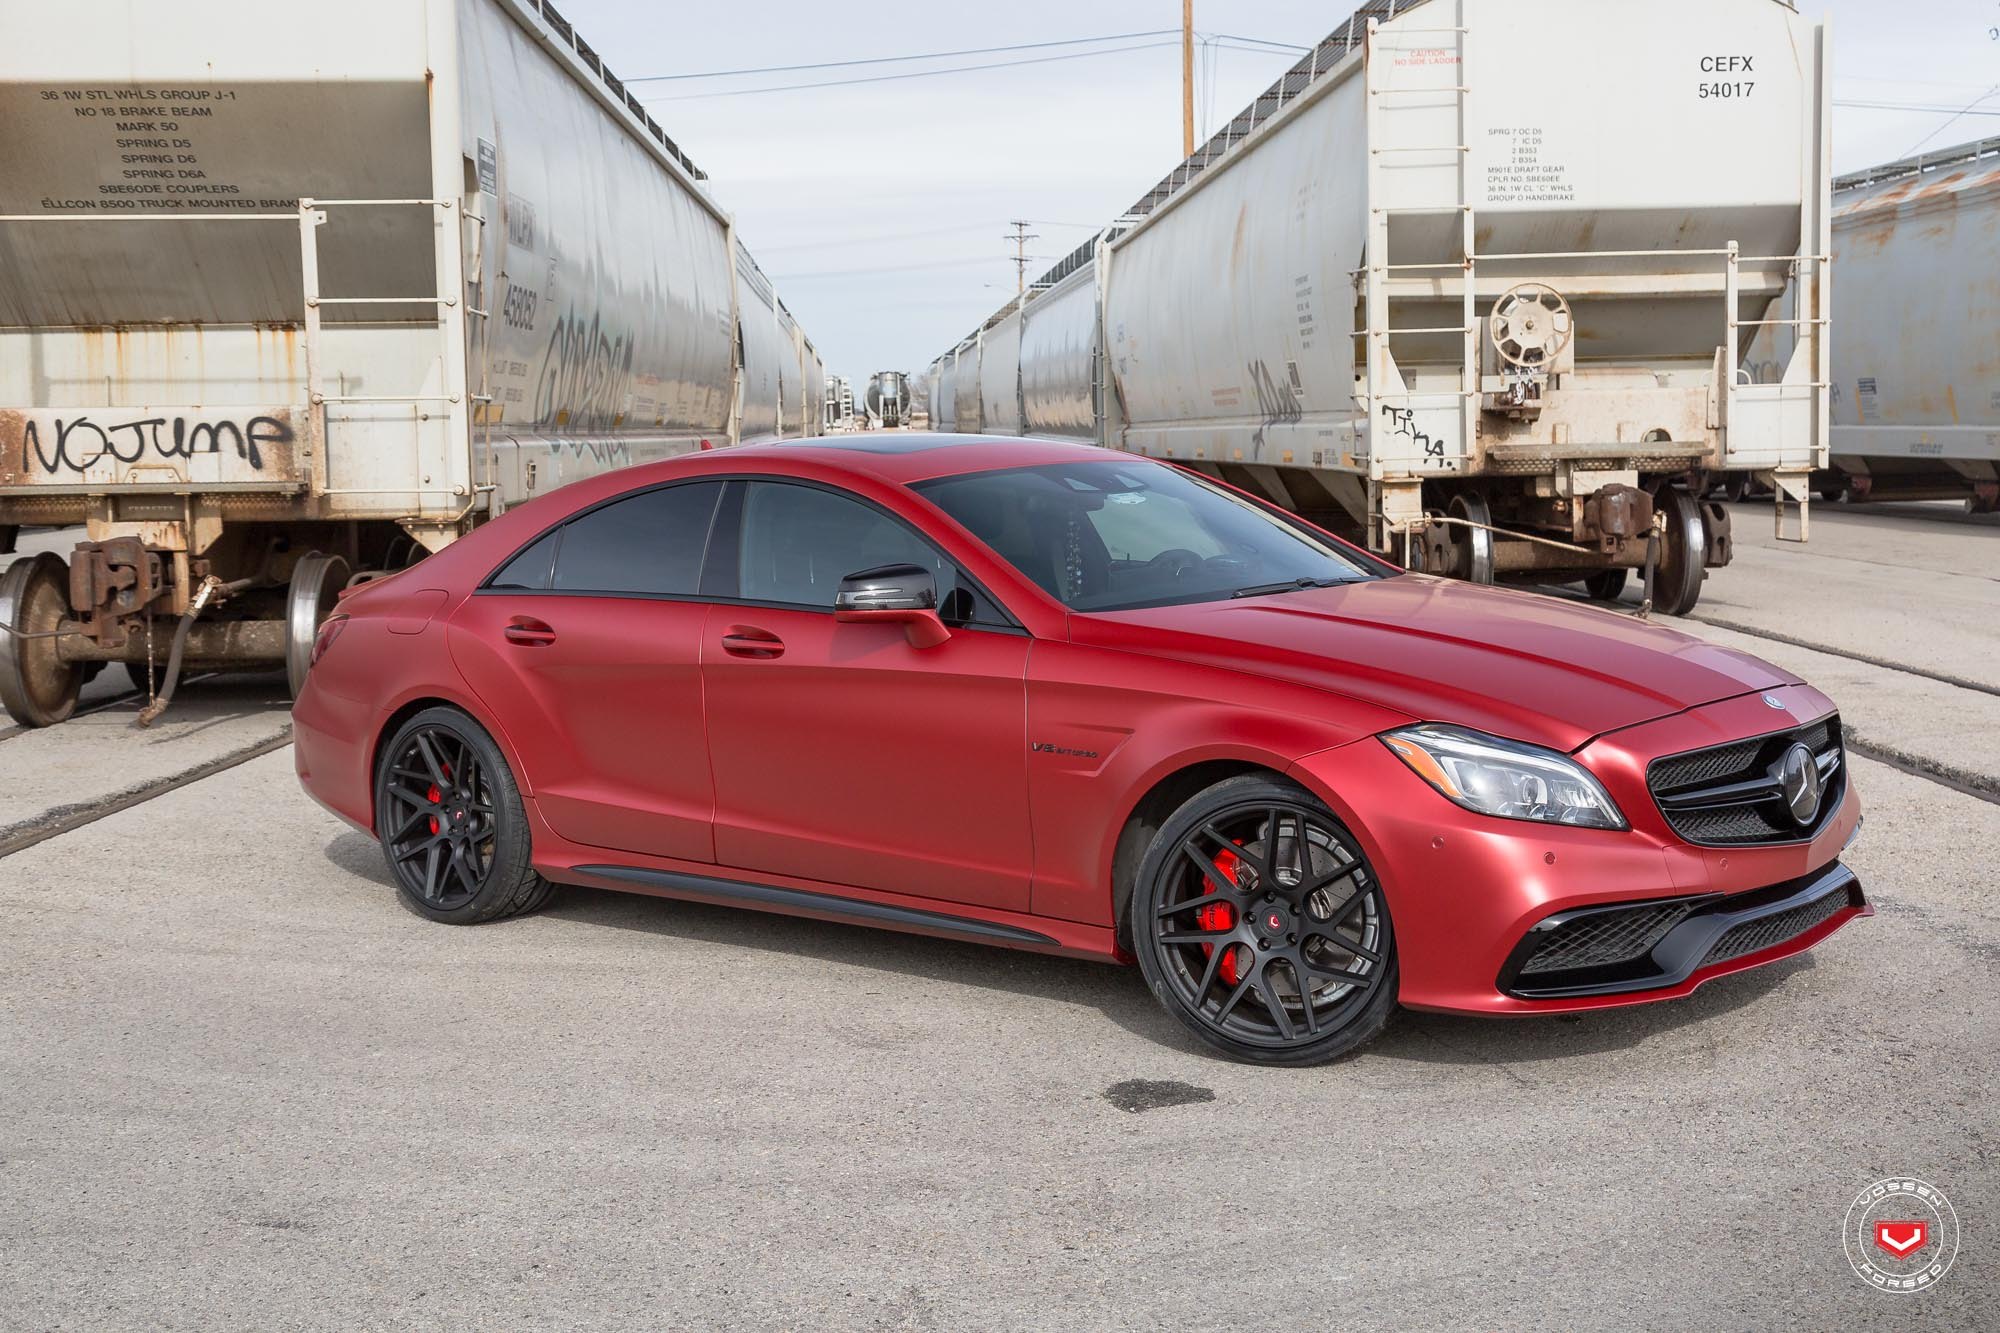 Blacked Out Mesh Grille on Red Mercedes CLS Class - Photo by Vossen